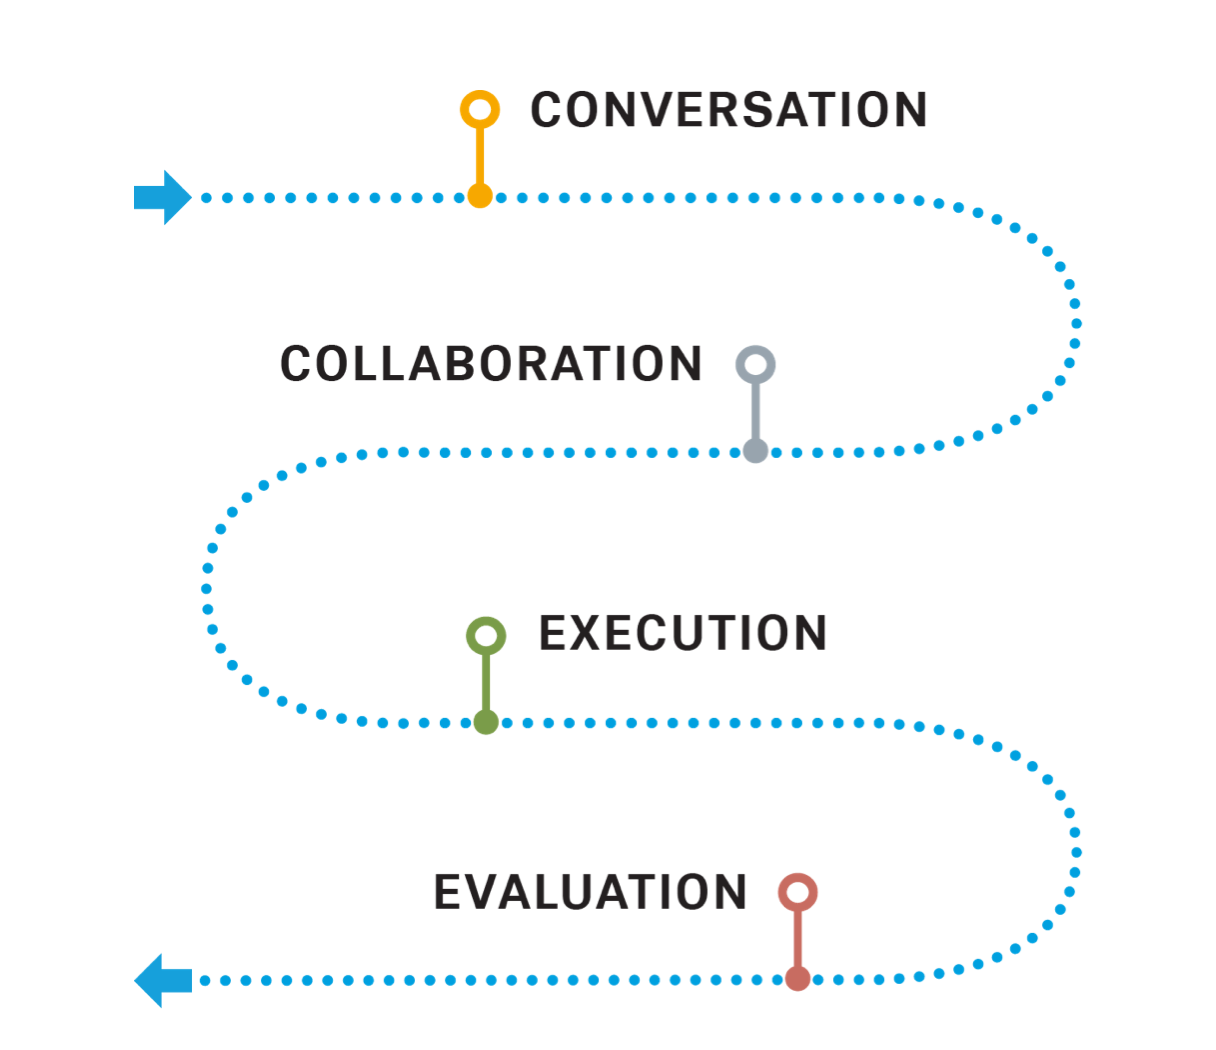 Planning process journey graphic leading from conversation to collaboration to execution and ending in evaluation.